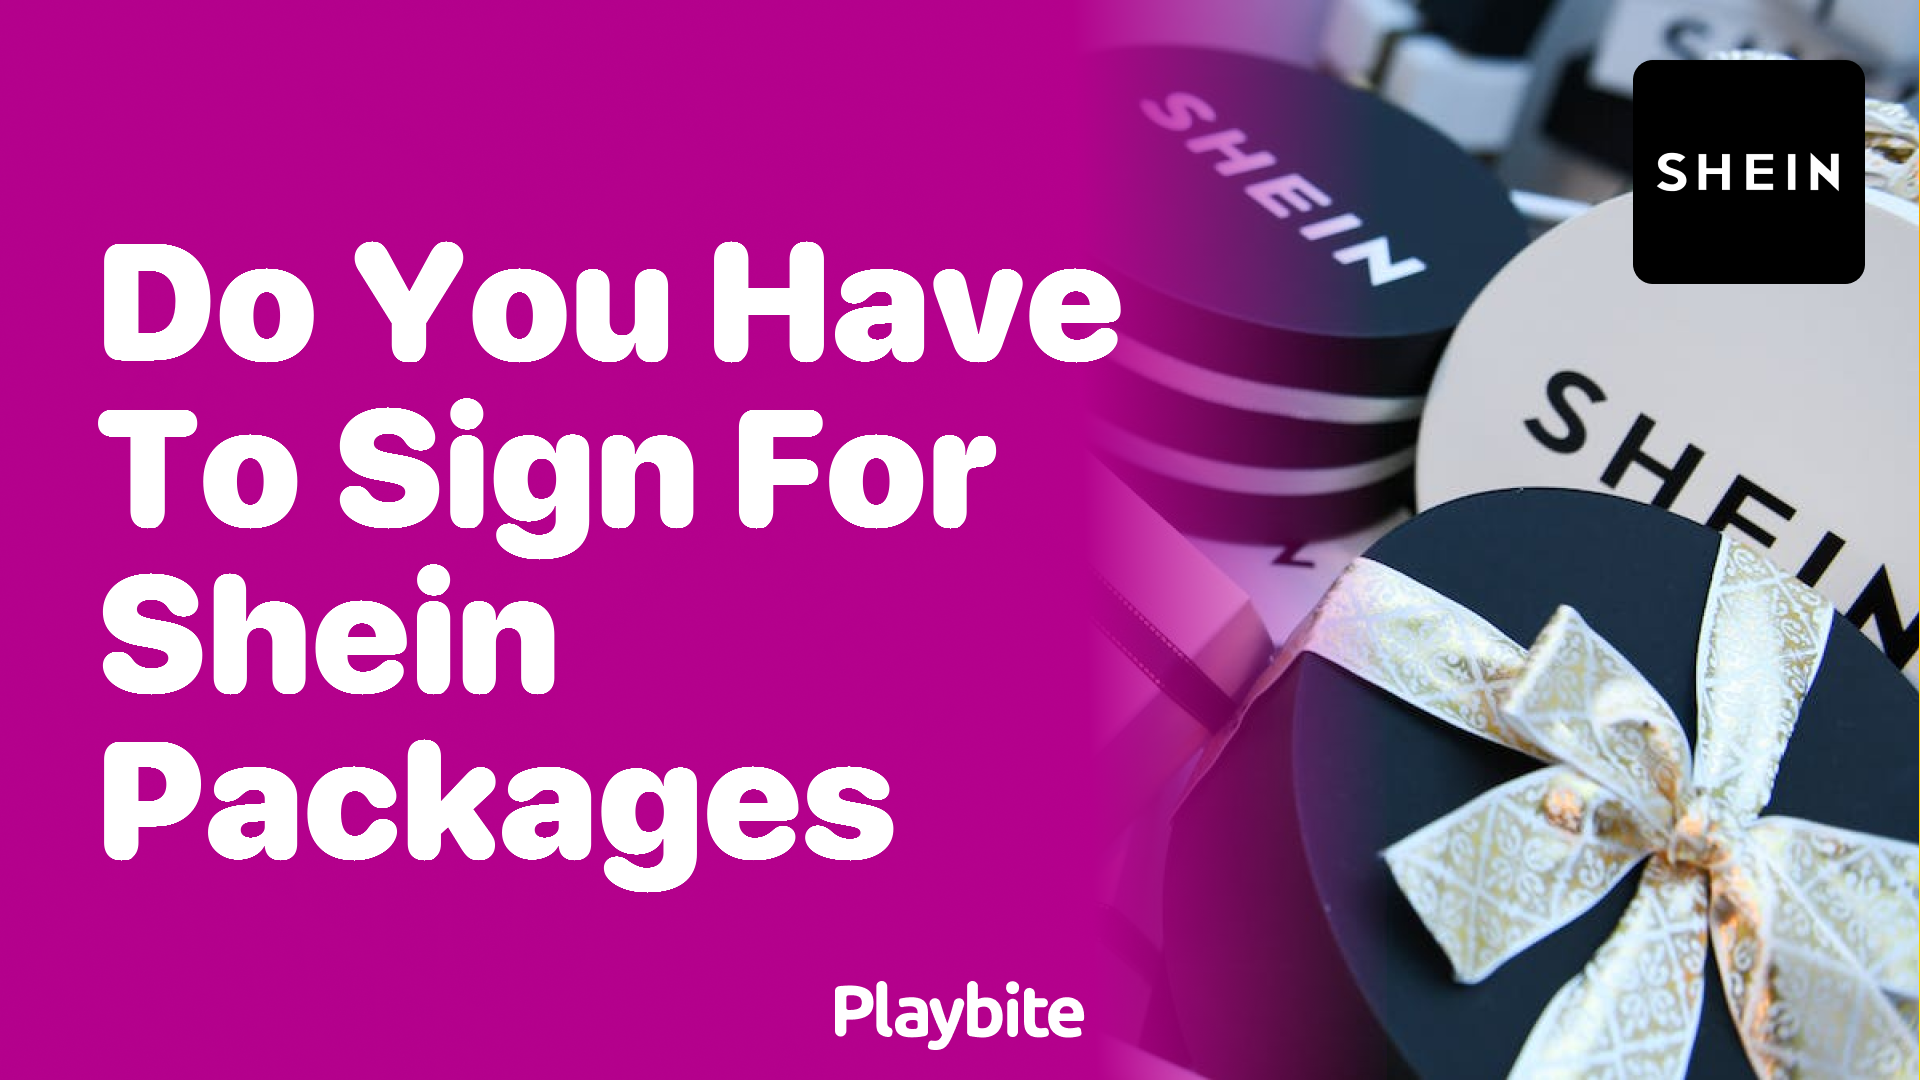 Do You Have to Sign for Shein Packages? Let's Find Out! - Playbite